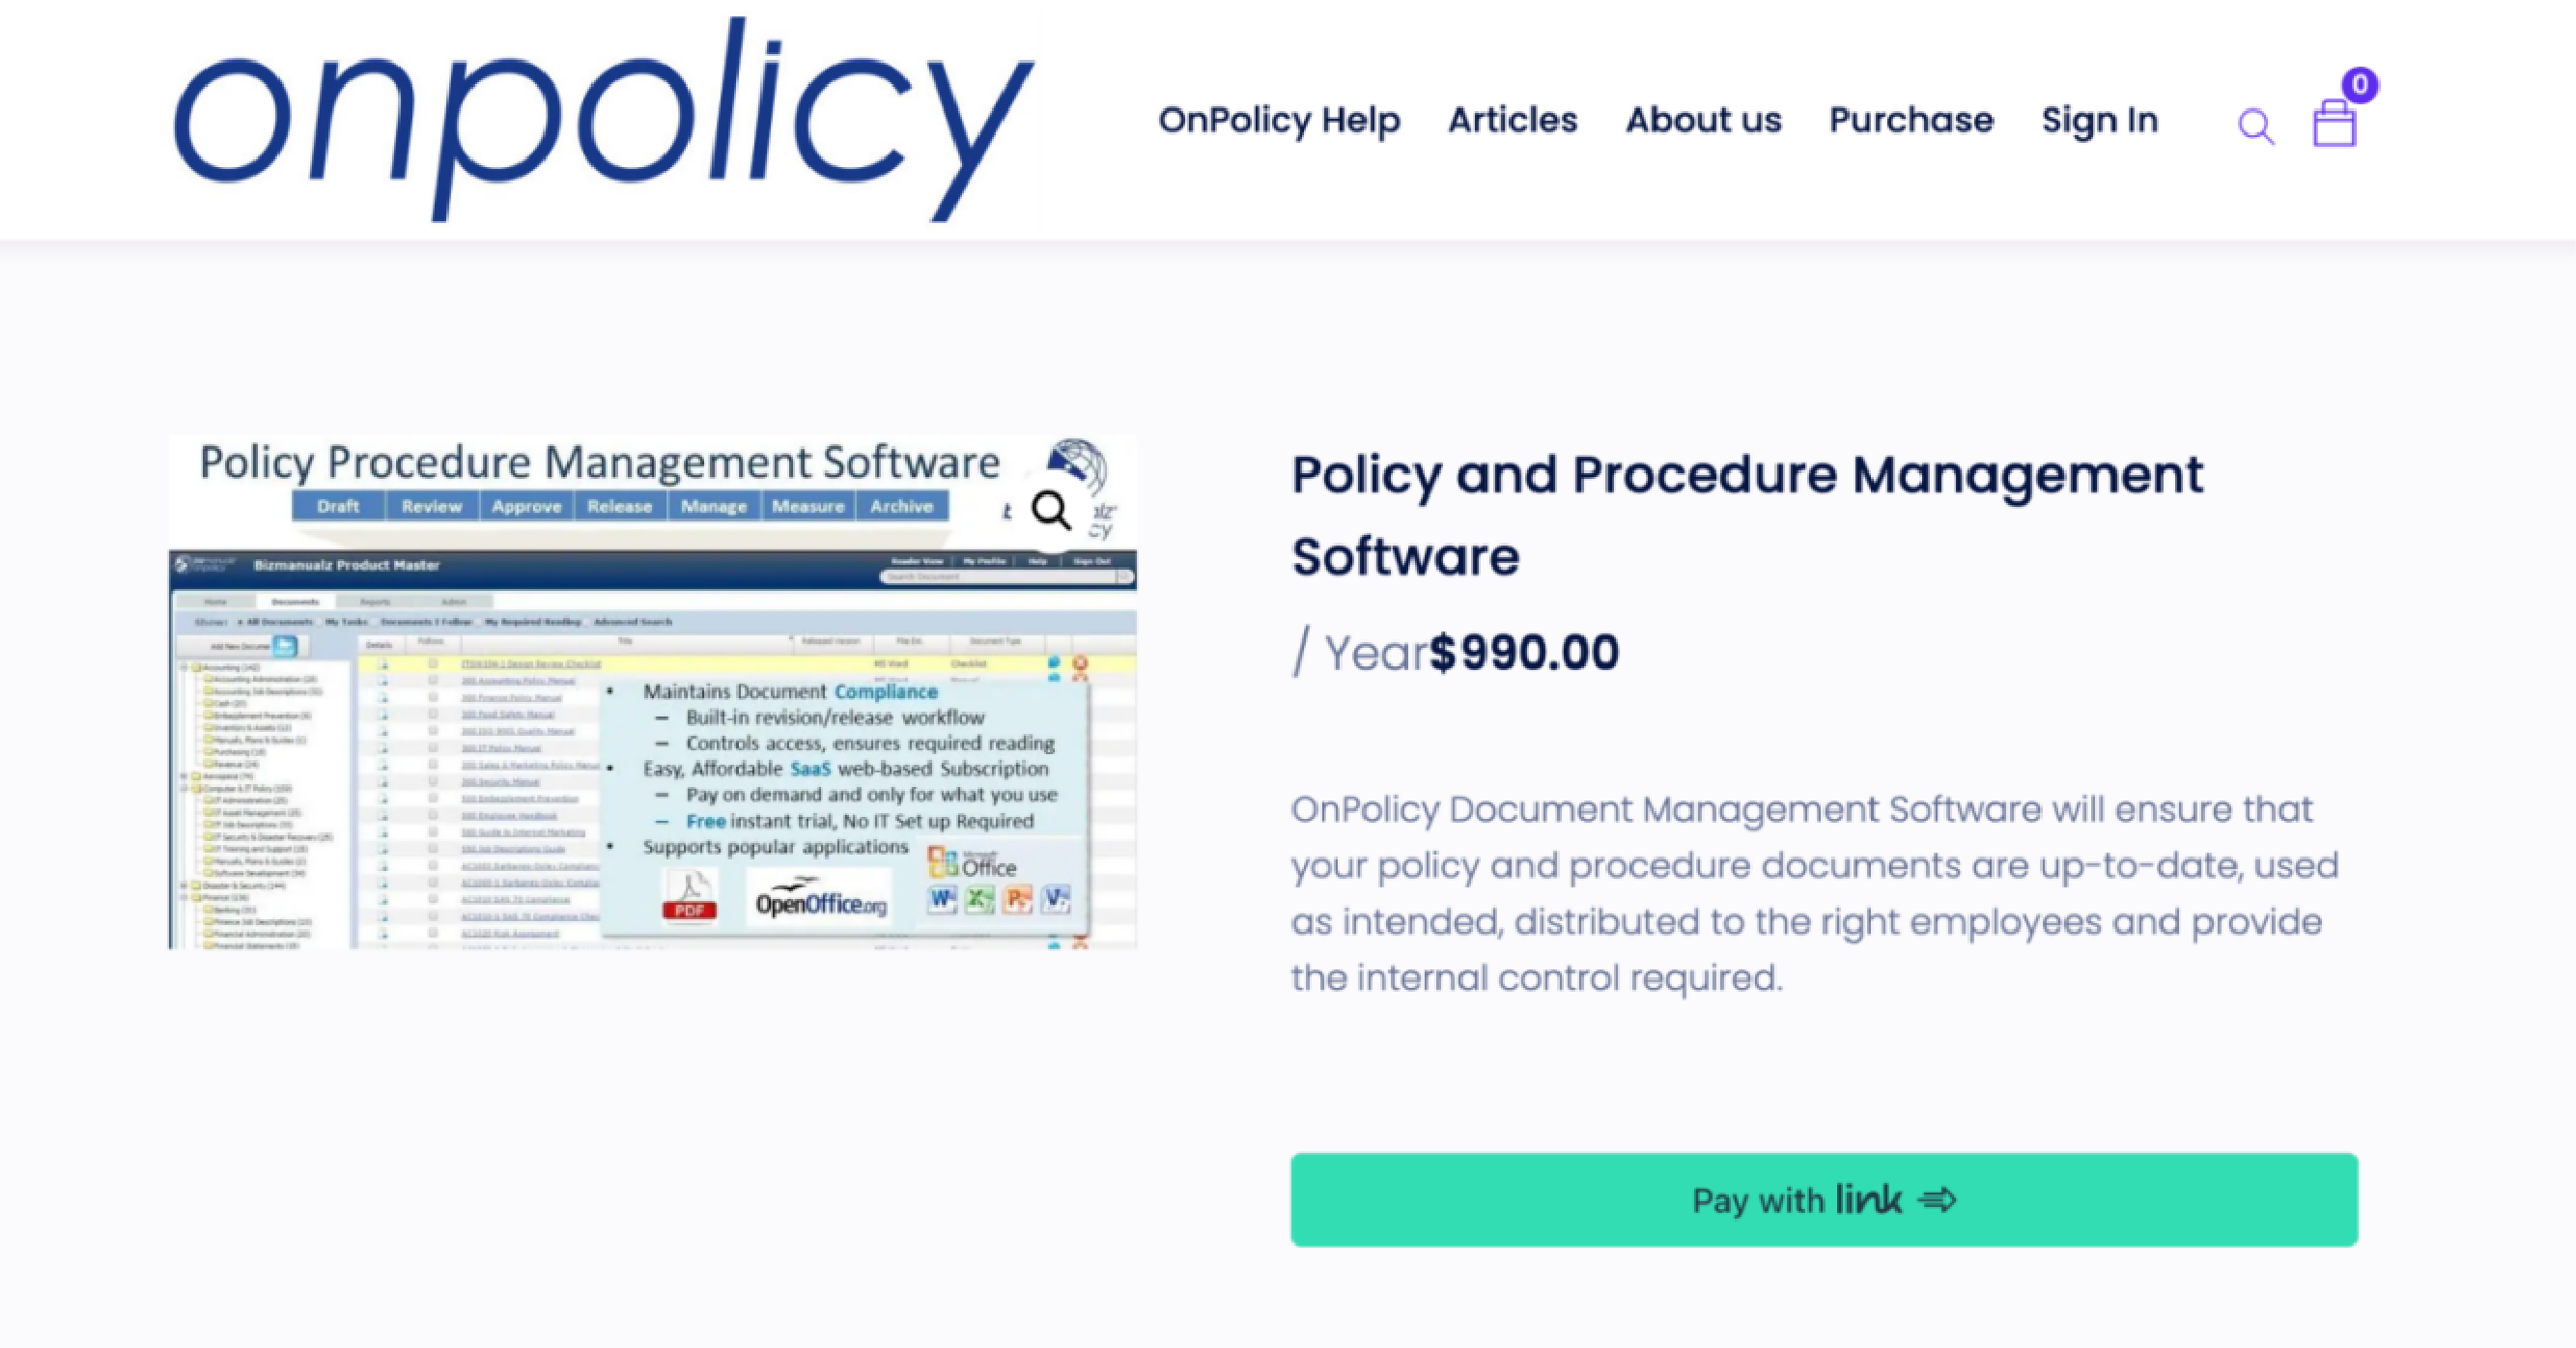 OnPolicy has a single pricing plan